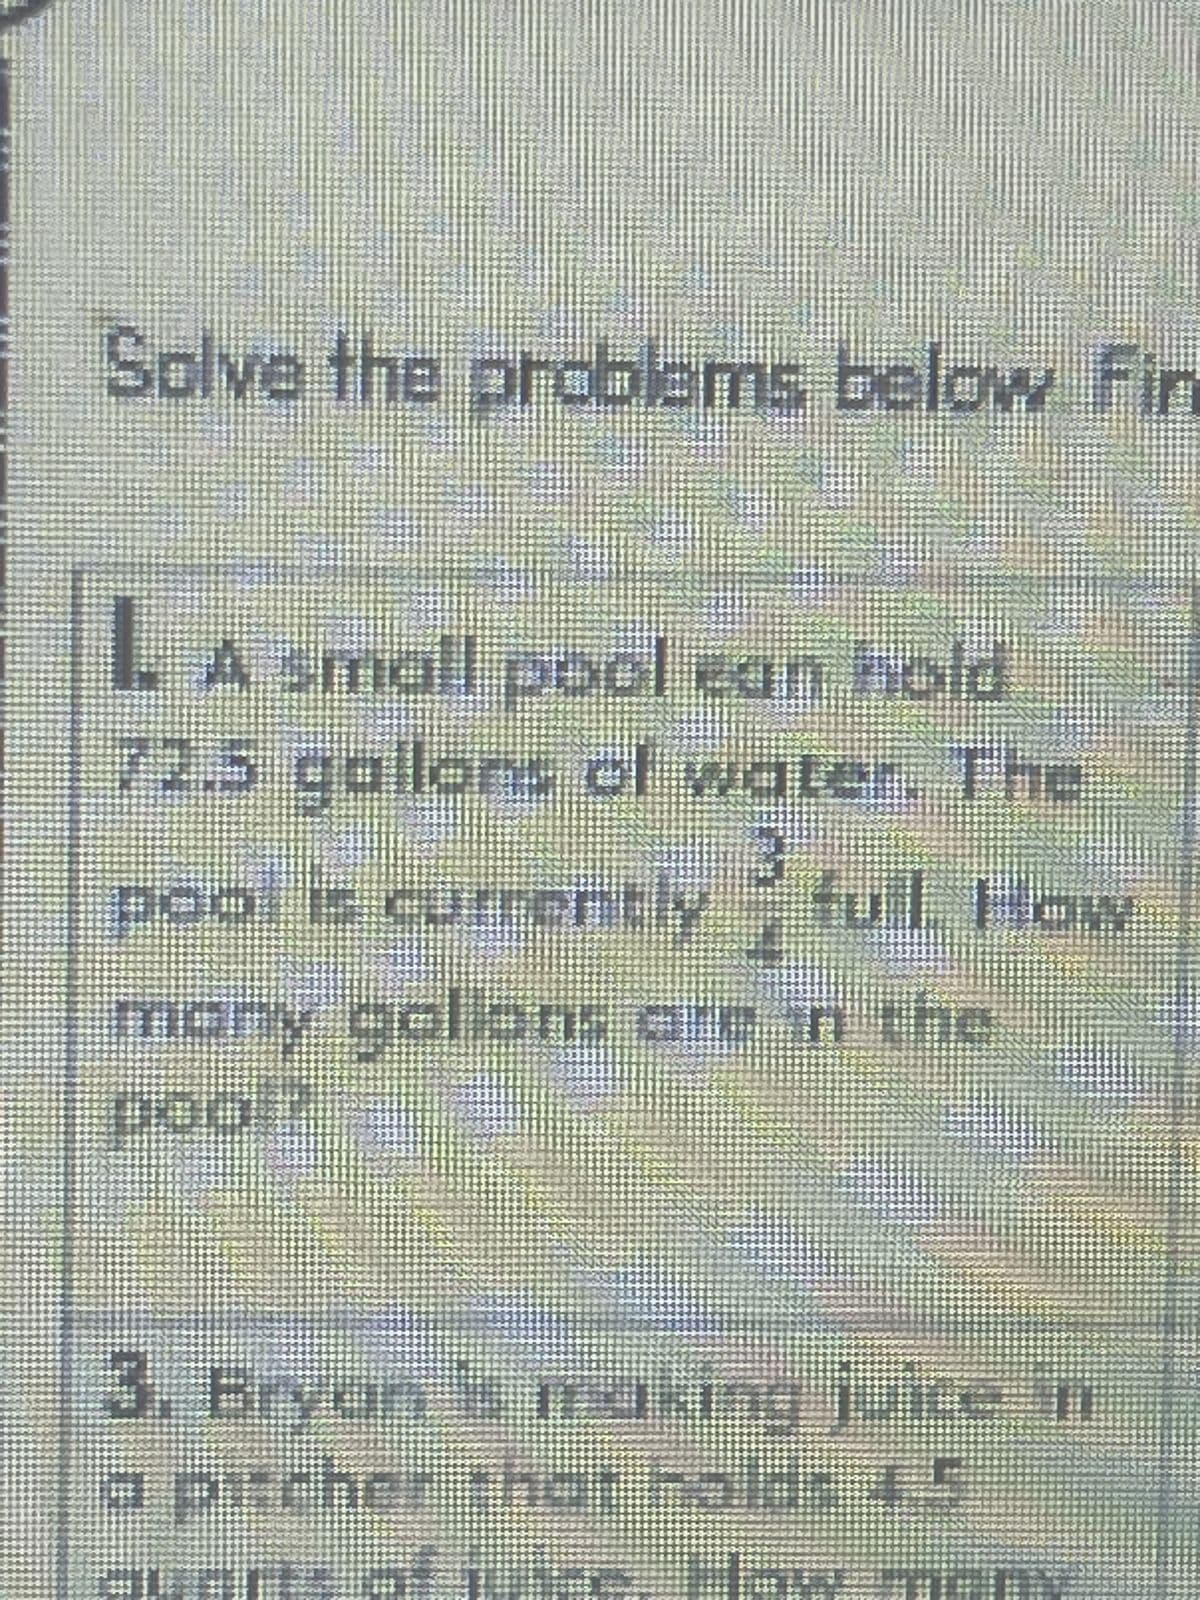 Solve the problems below. Fin
. A small pool ean hold
72.5 gallons of water. The
poo, is currentlyful How
many gallons are in the
poo 2
3. Bryan is making juice in
a pitcher that hold: 4.5